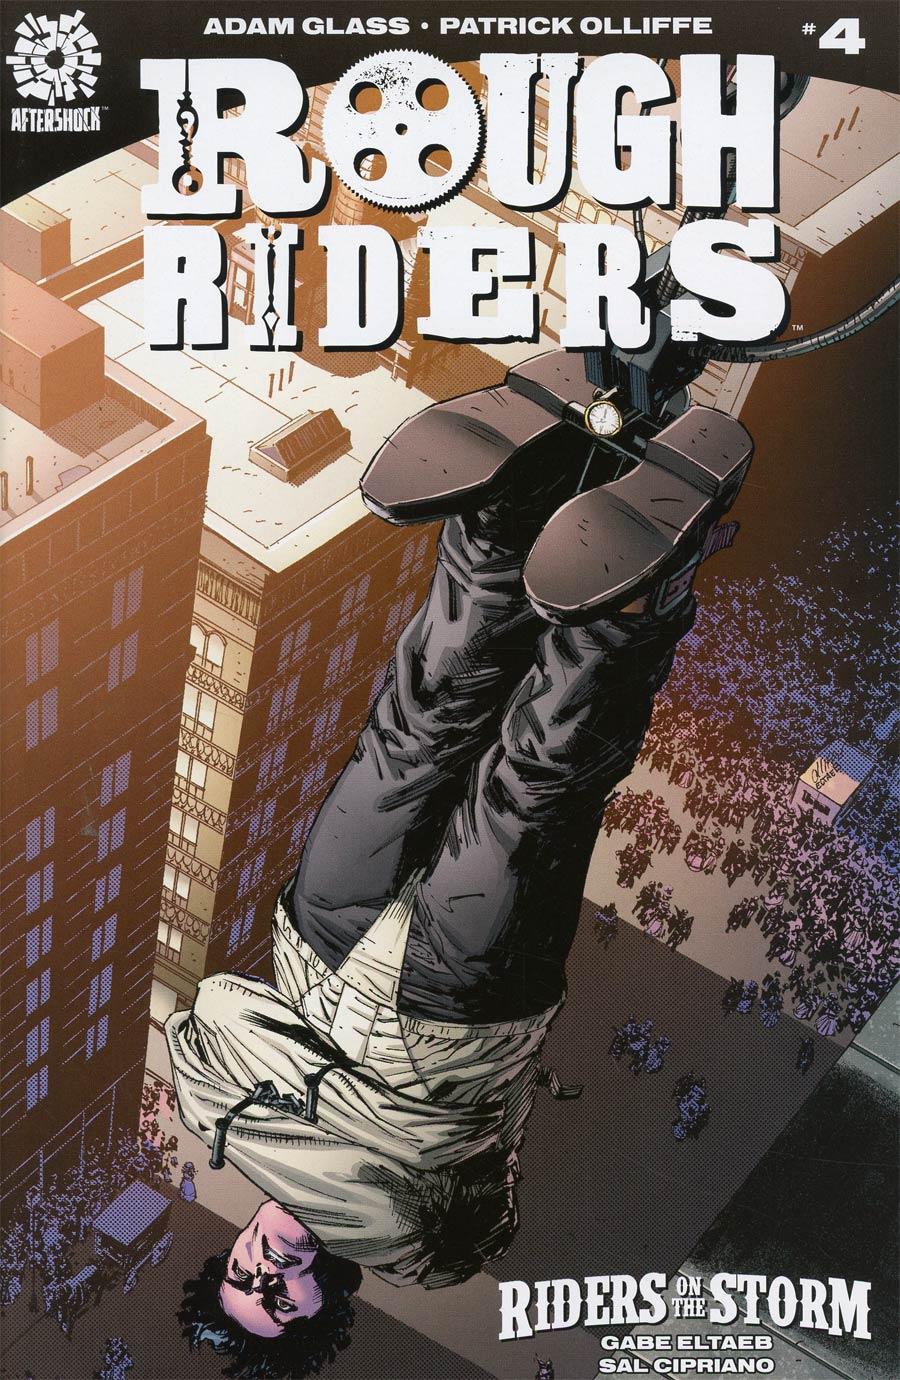 Rough Riders Riders On The Storm Vol. 1 #4